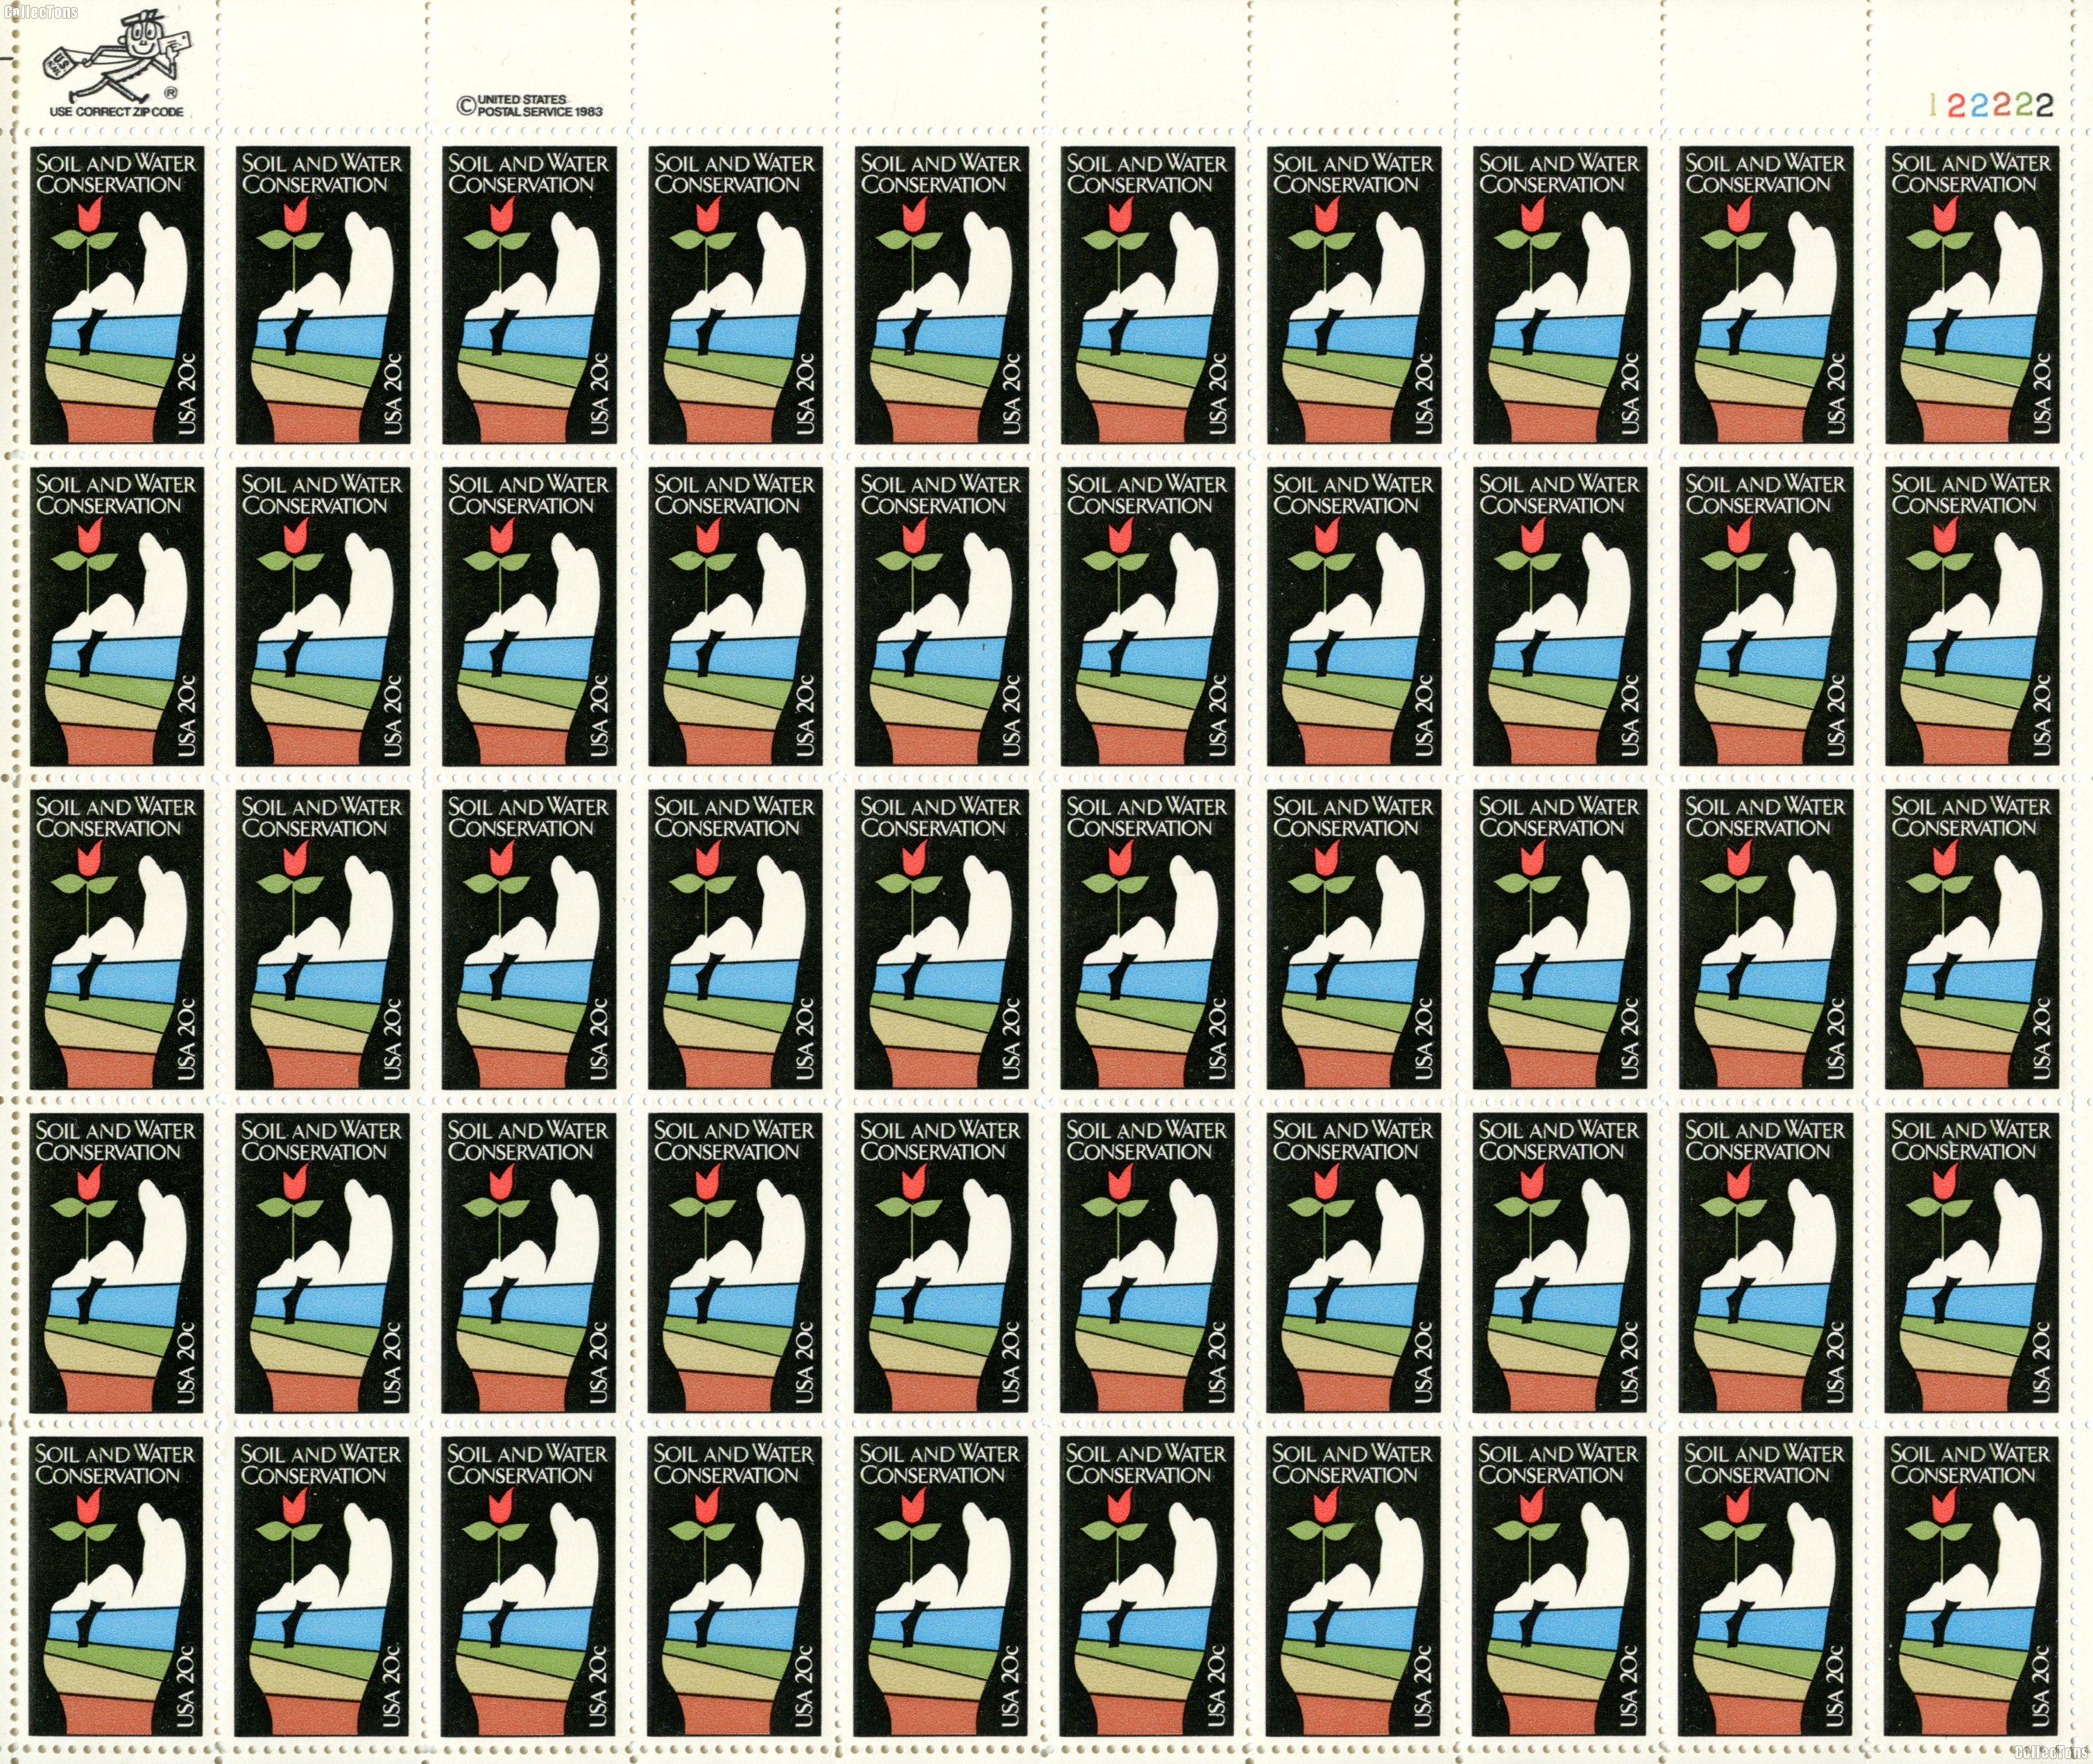 1984 Soil and Water Conservation 20 Cent US Postage Stamp MNH Sheet of 50 Scott #2074